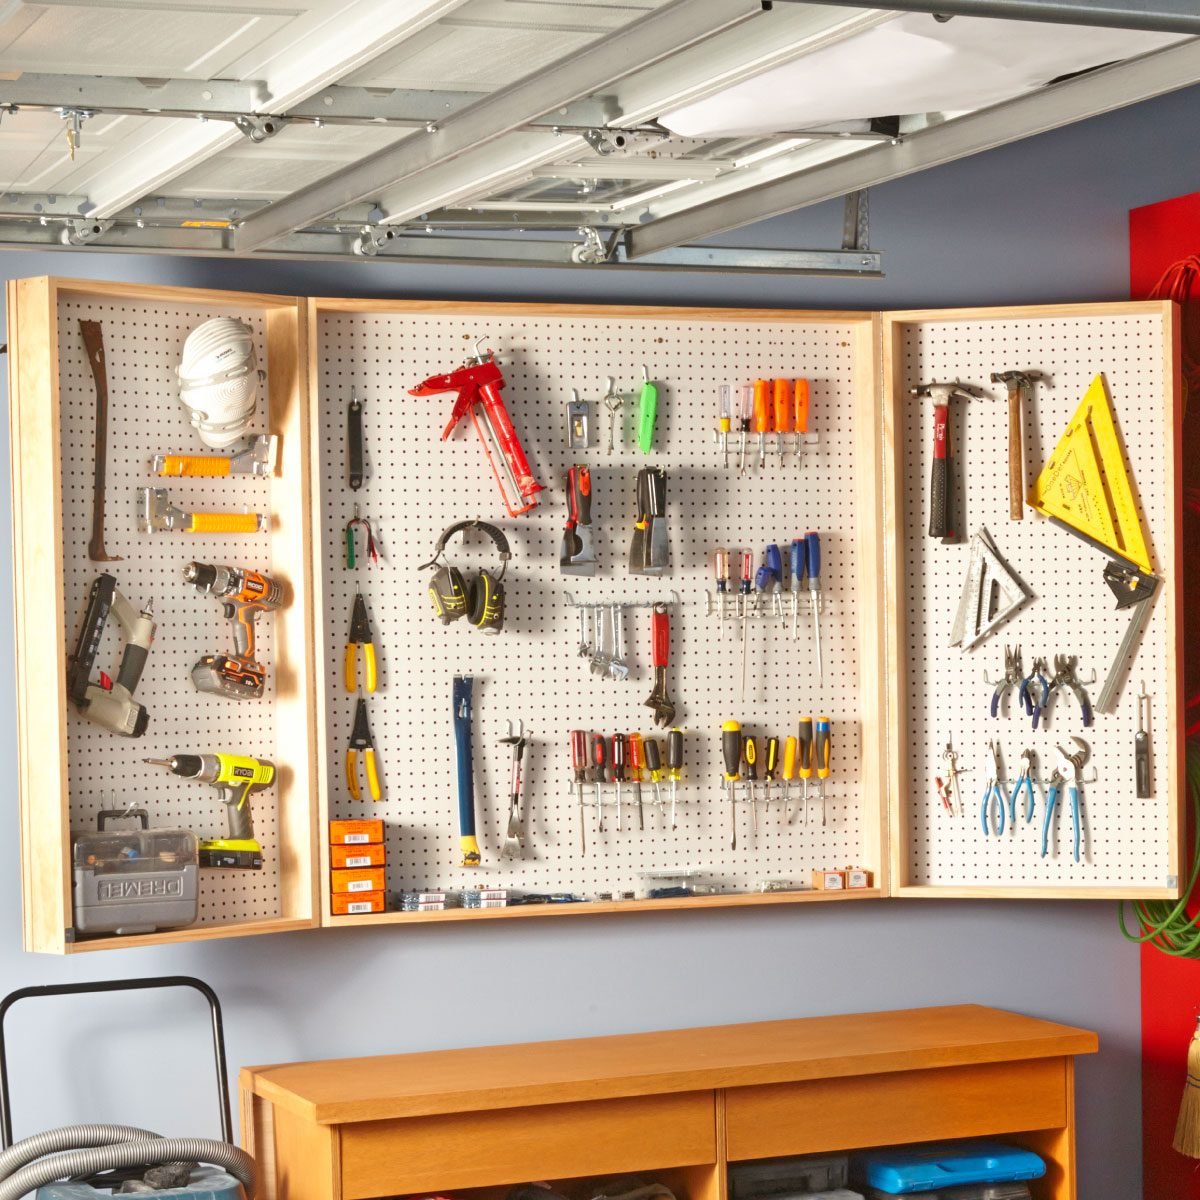 How to Build a Garage Wall Cabinet